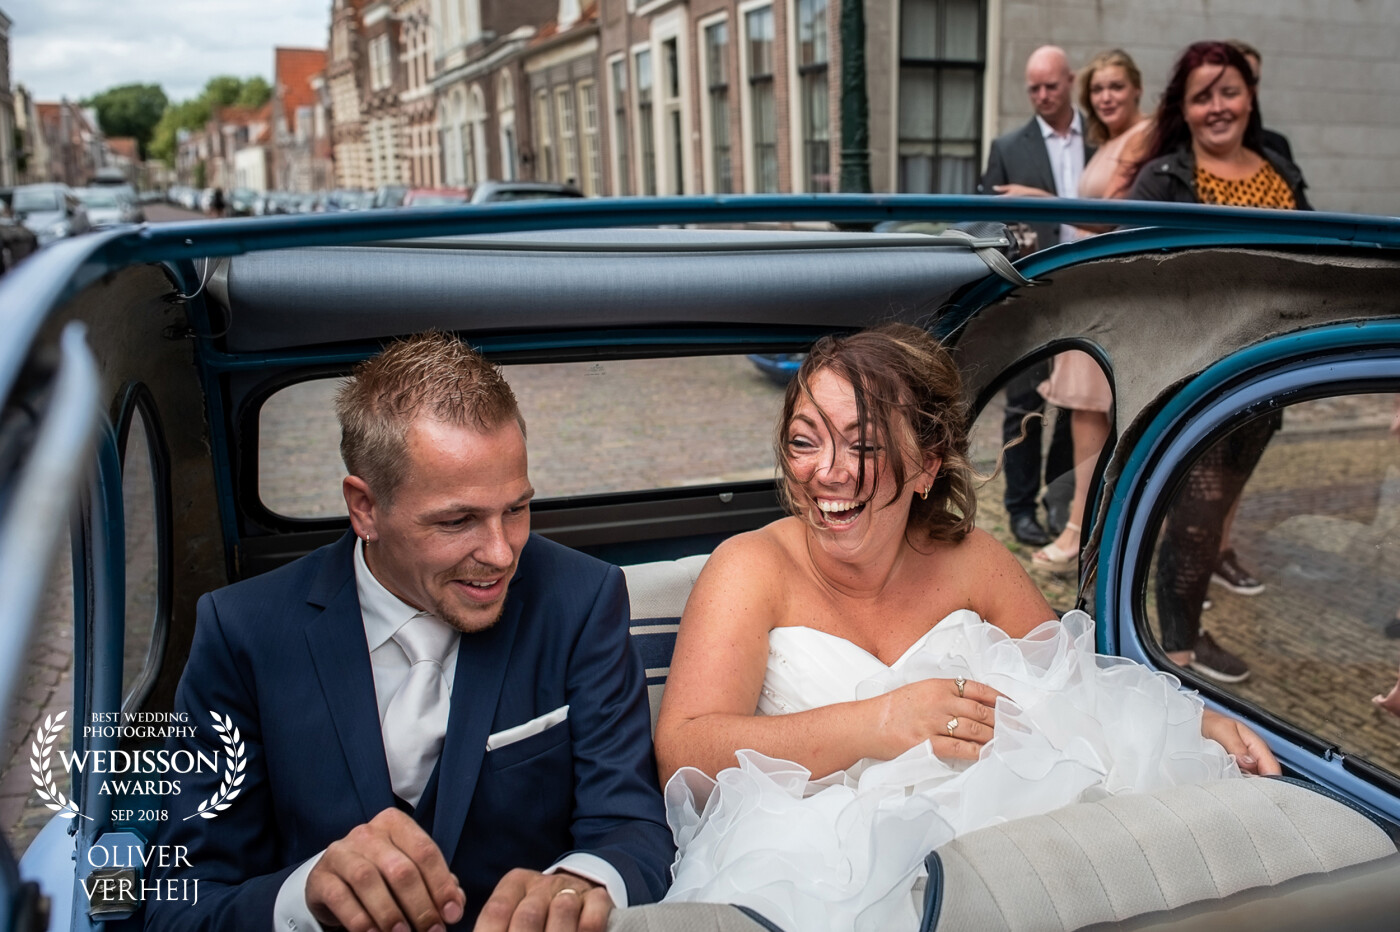 This lovely couple, Patty and Diëgo, got married on an augustday full of love. After the ceremony they got into this characteristic topless deux-chevaux. This created a perfect photomoment wich makes for a beautiful memory.